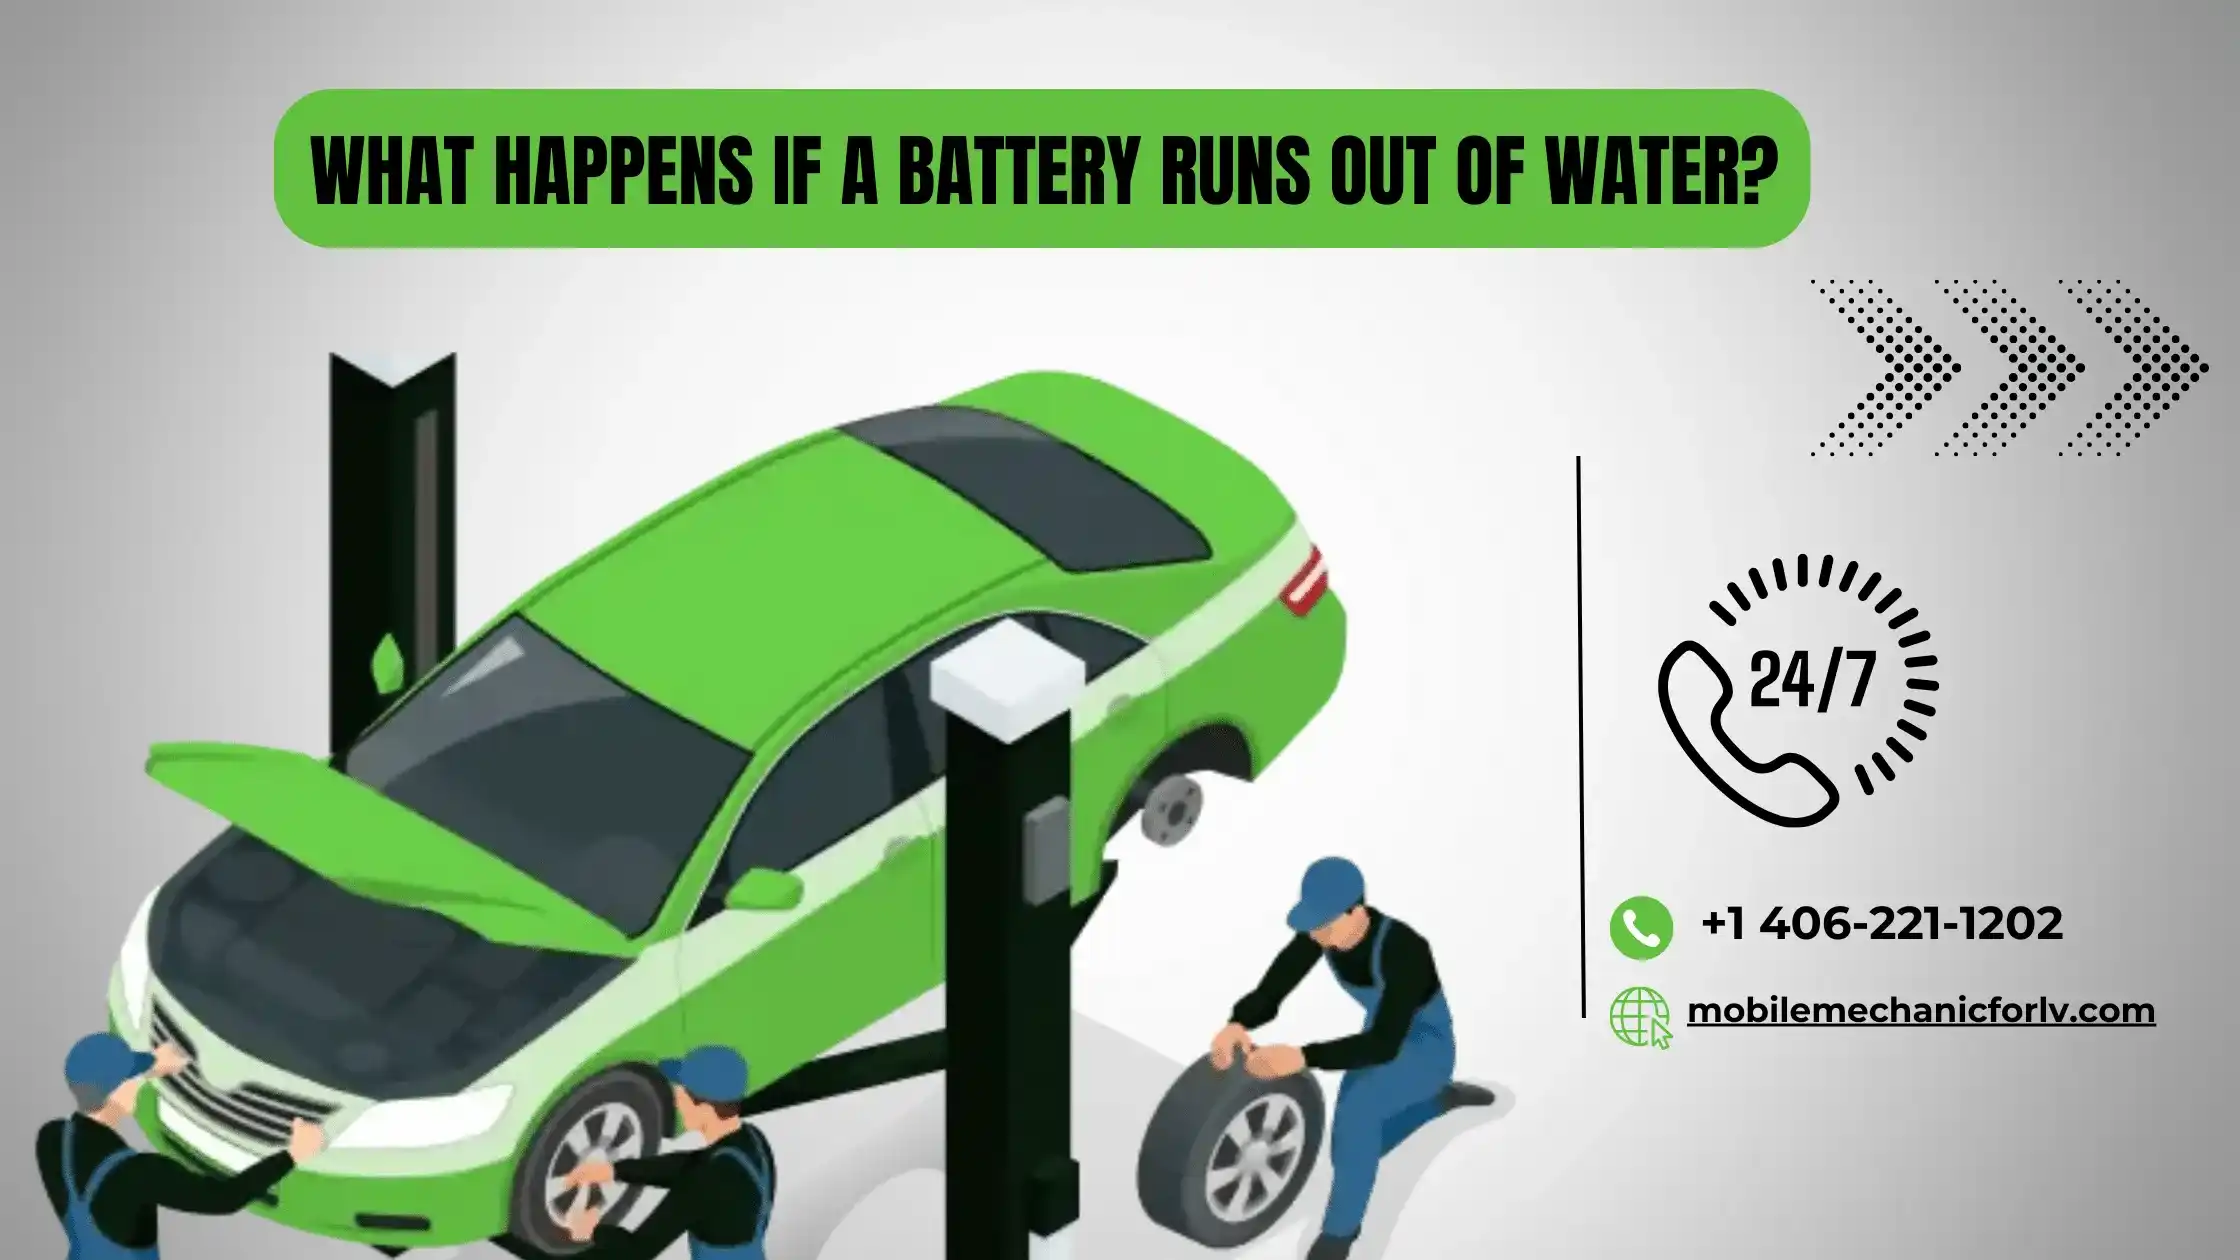 What Happens if a Battery Runs out of Water